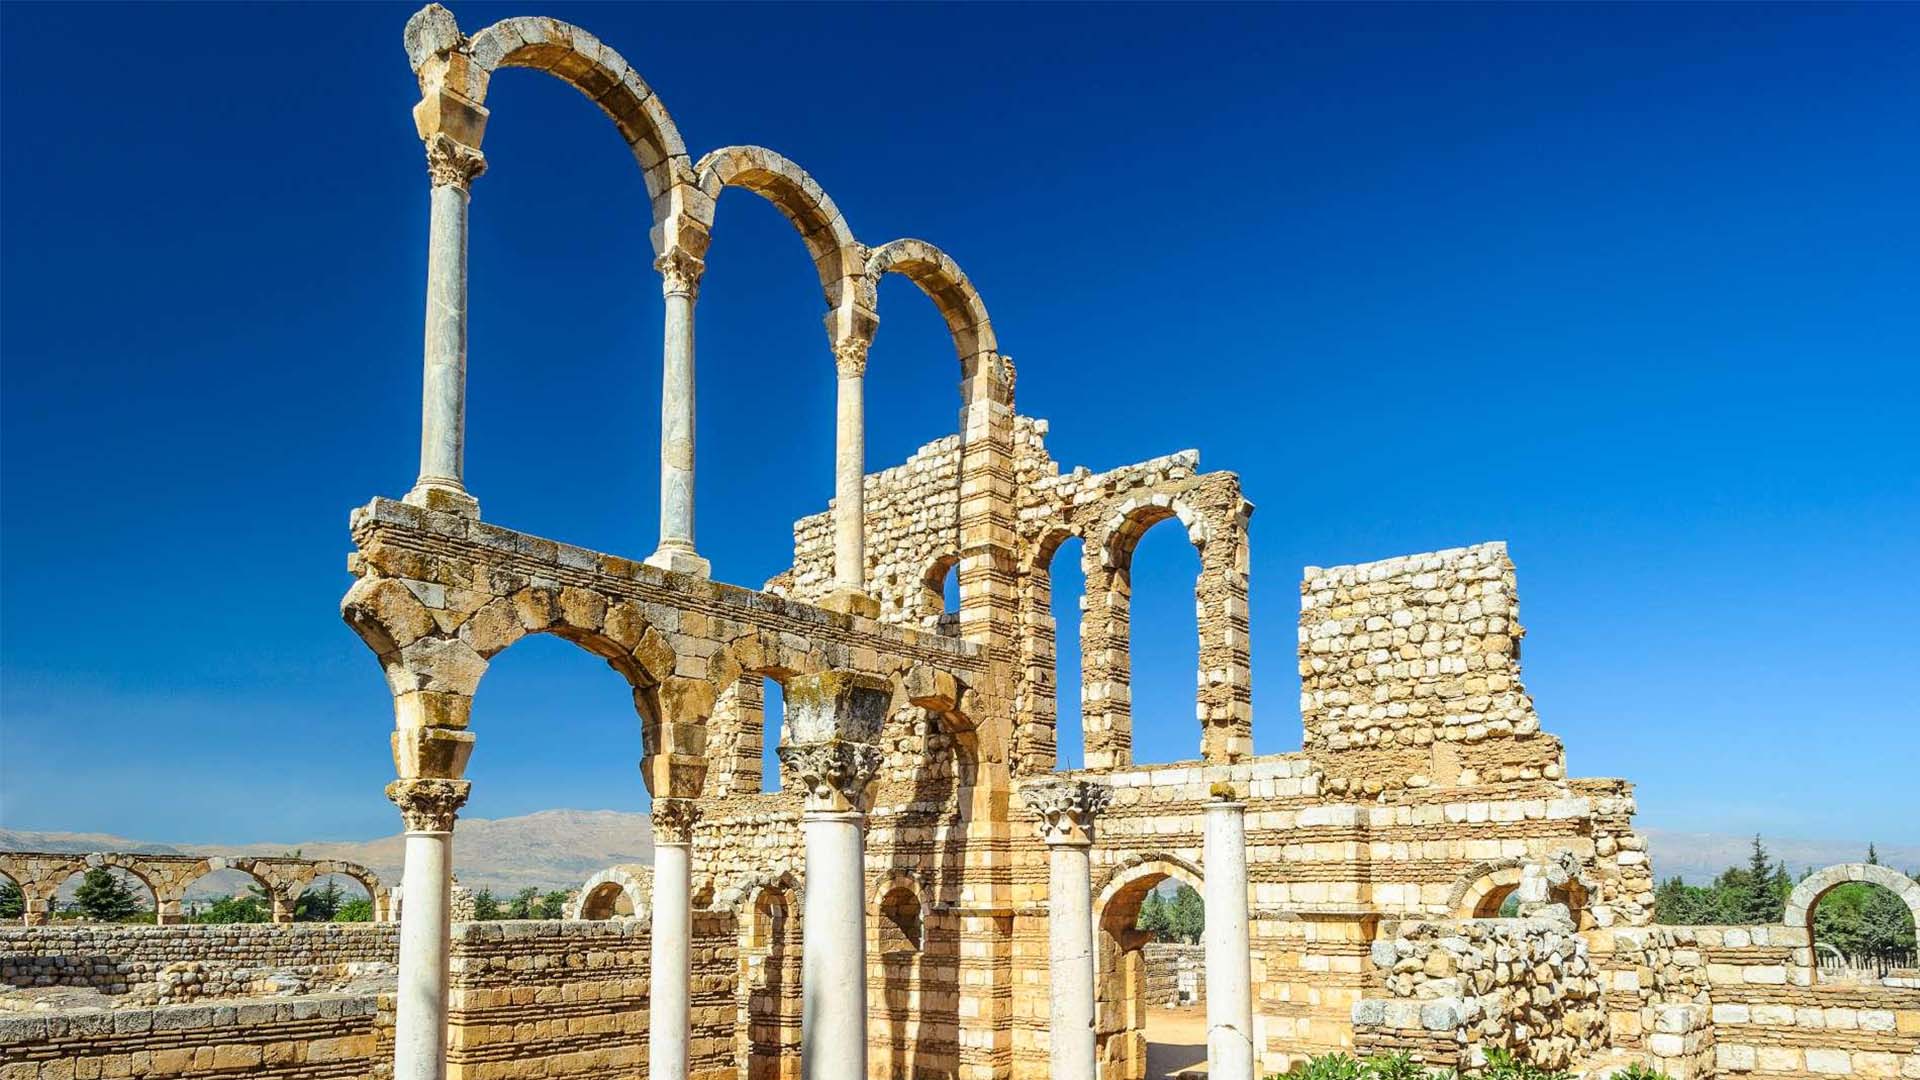 A photograph immortalizes the captivating ruins of Anjar, celebrated for its remarkably well-preserved Umayyad remnants.